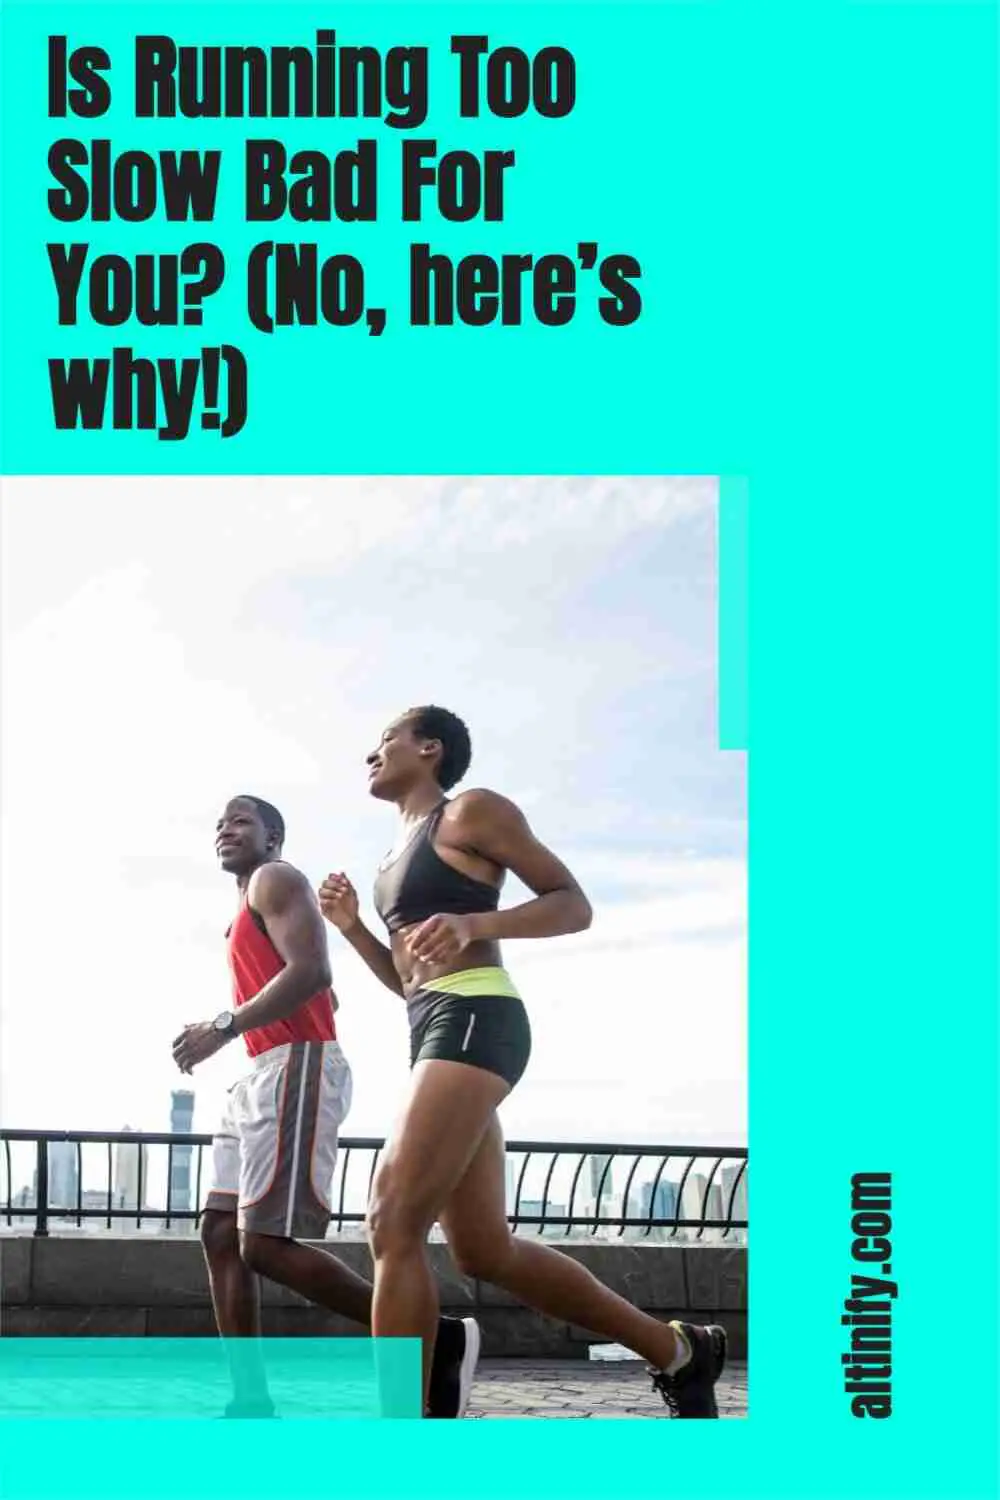 Is Running Too Slow Bad For You? (No, And here’s why!)